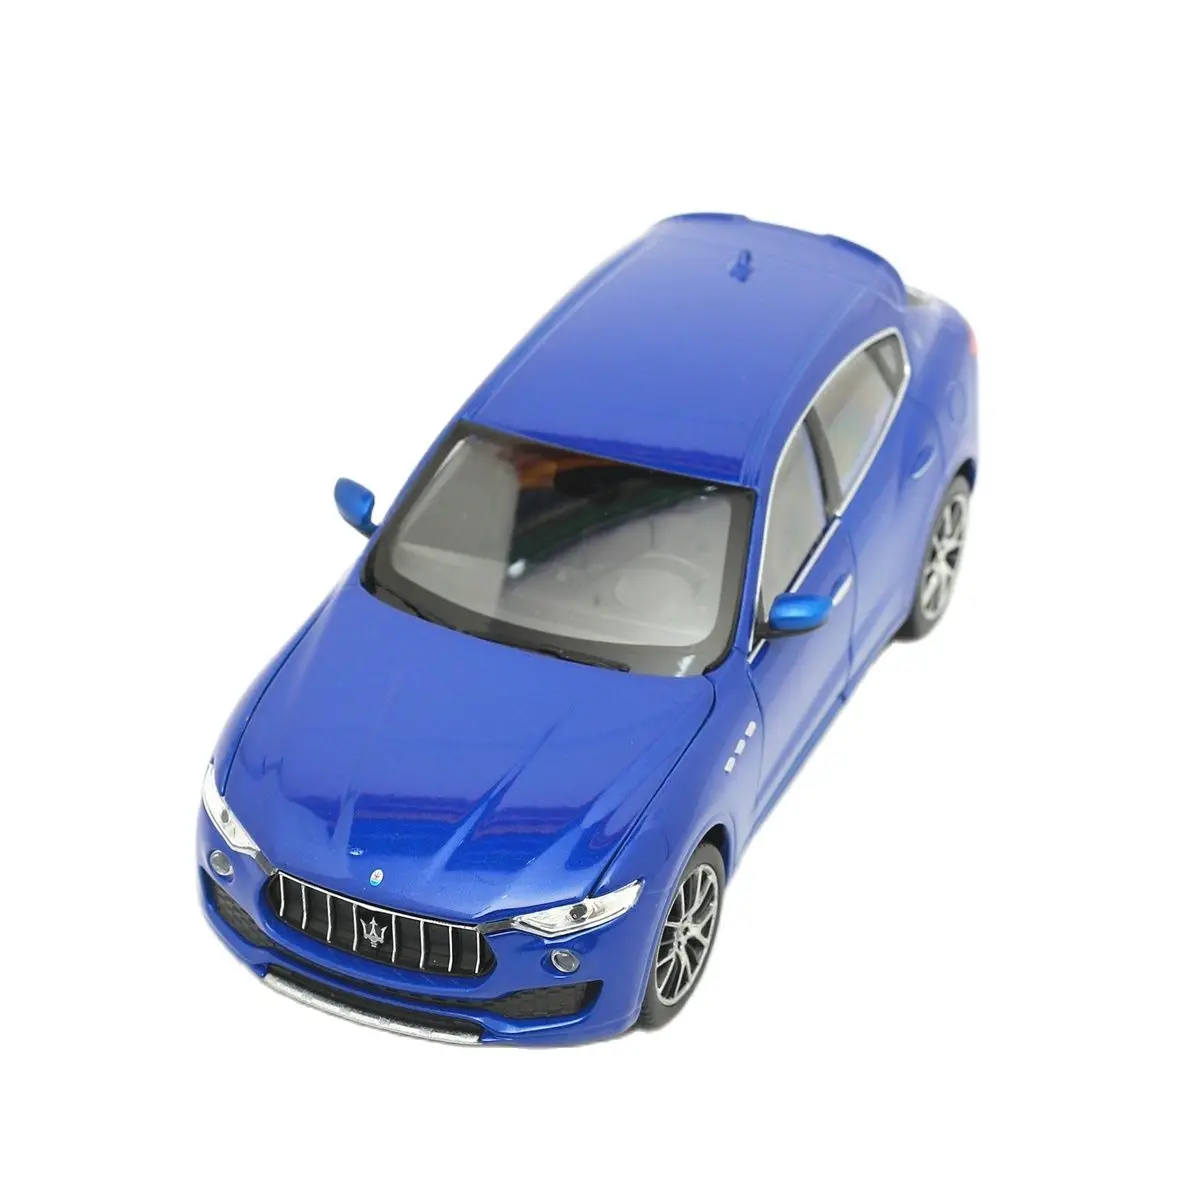 

WELLY 1:24 Maserati Levante SUV Alloy Luxury Vehicle Diecast Pull Back Cars Model Toy Collection Xmas Gift